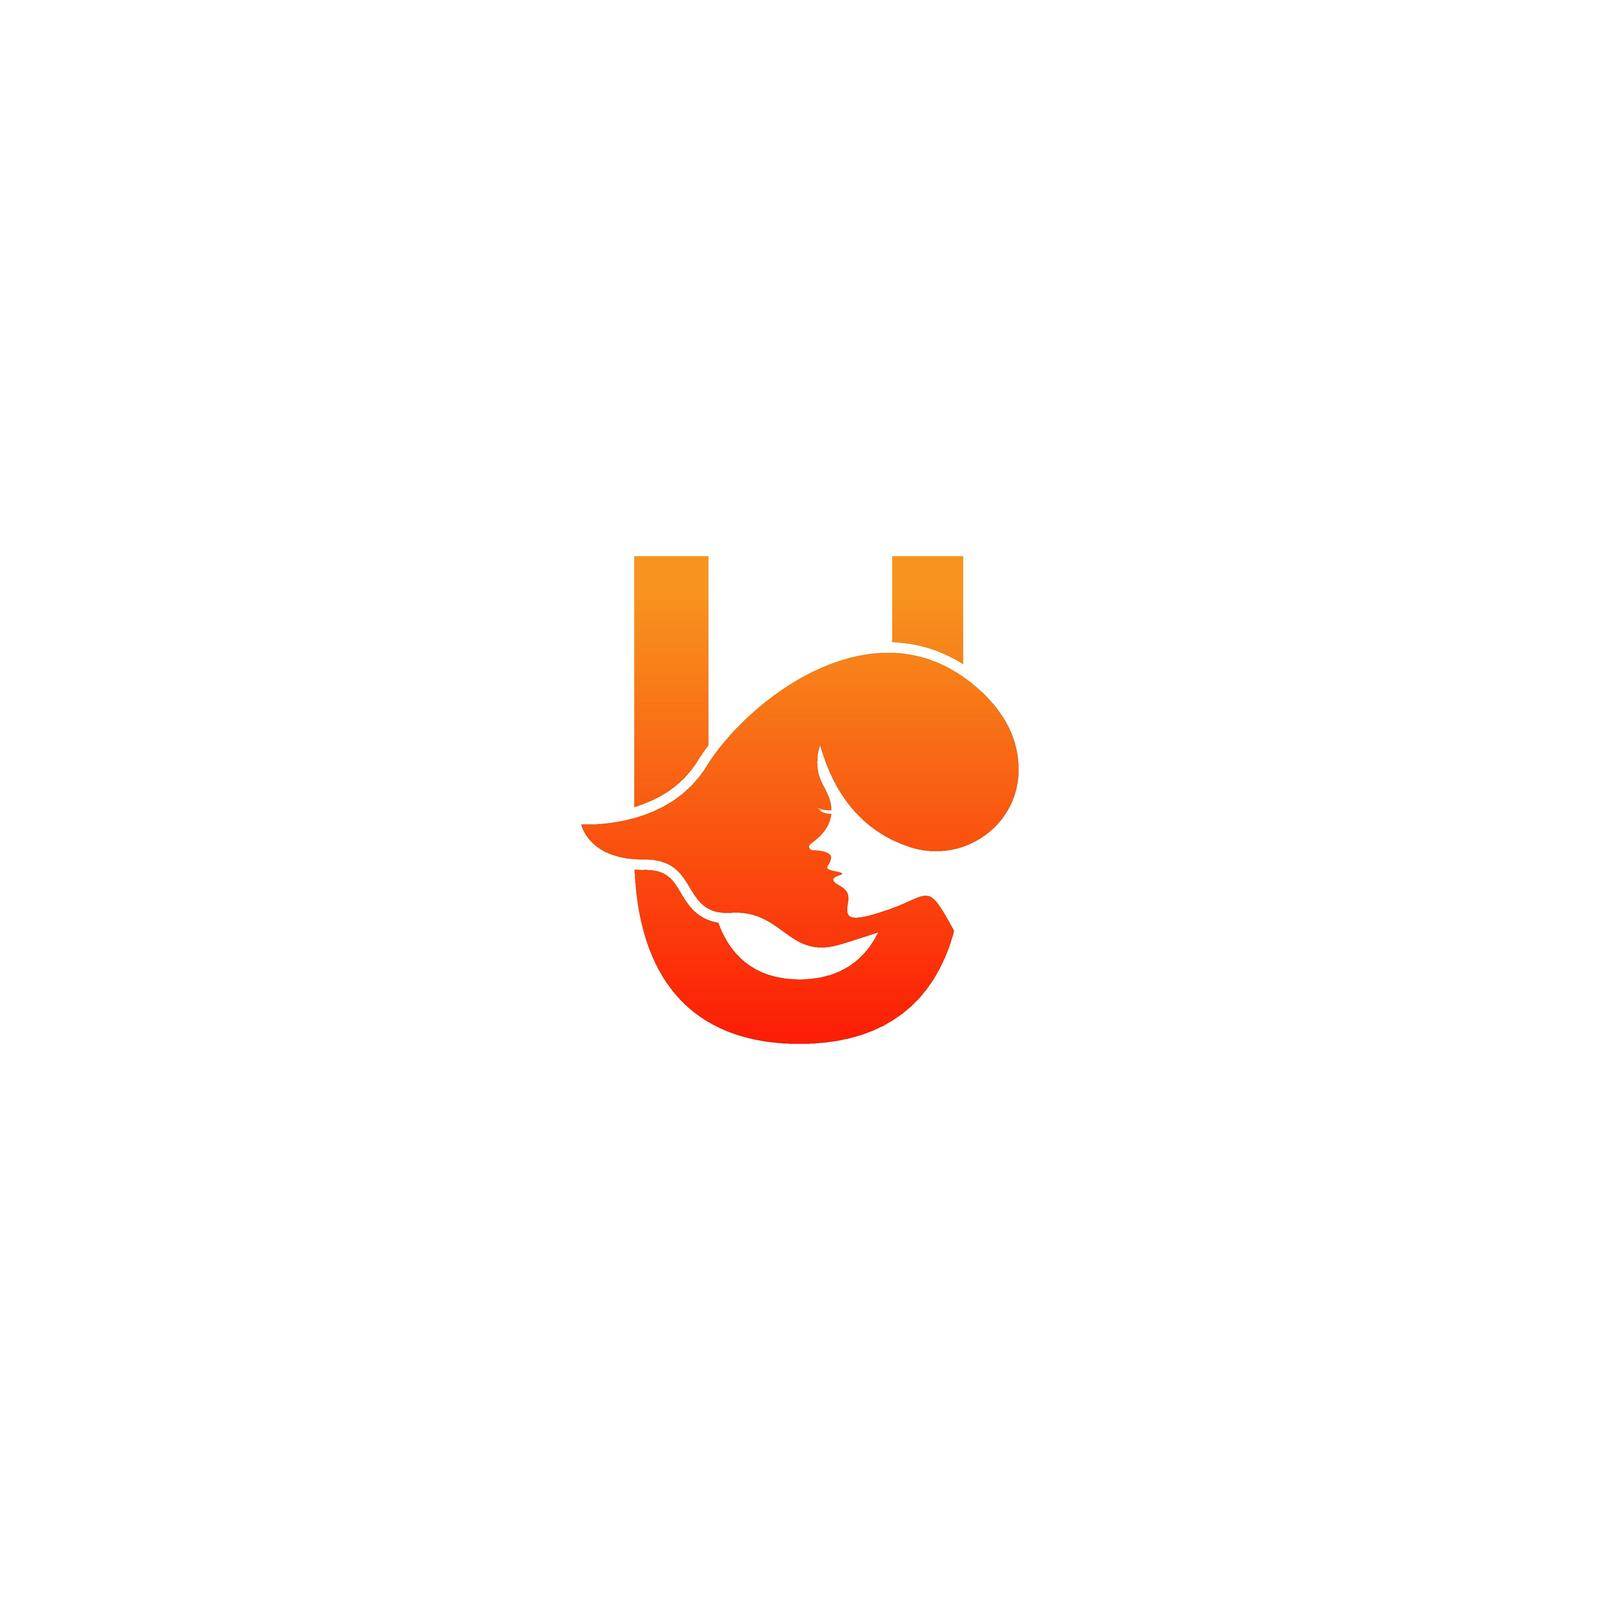 Letter U with woman face logo icon design vector by bellaxbudhong3